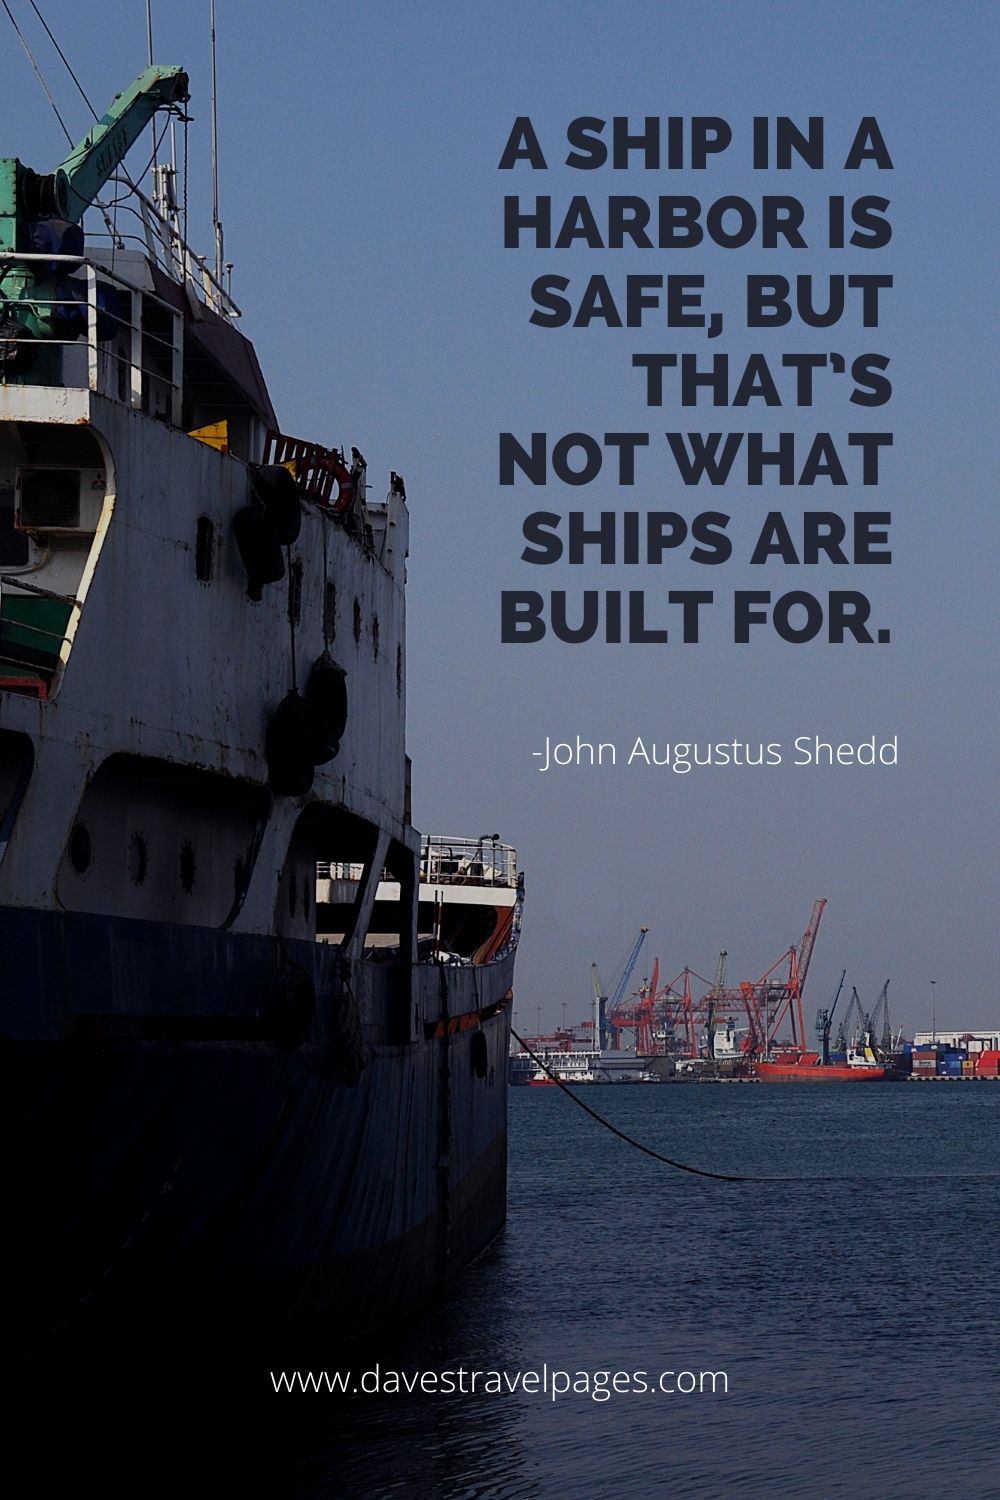 A ship in a harbor is safe, but that’s not what ships are built for.